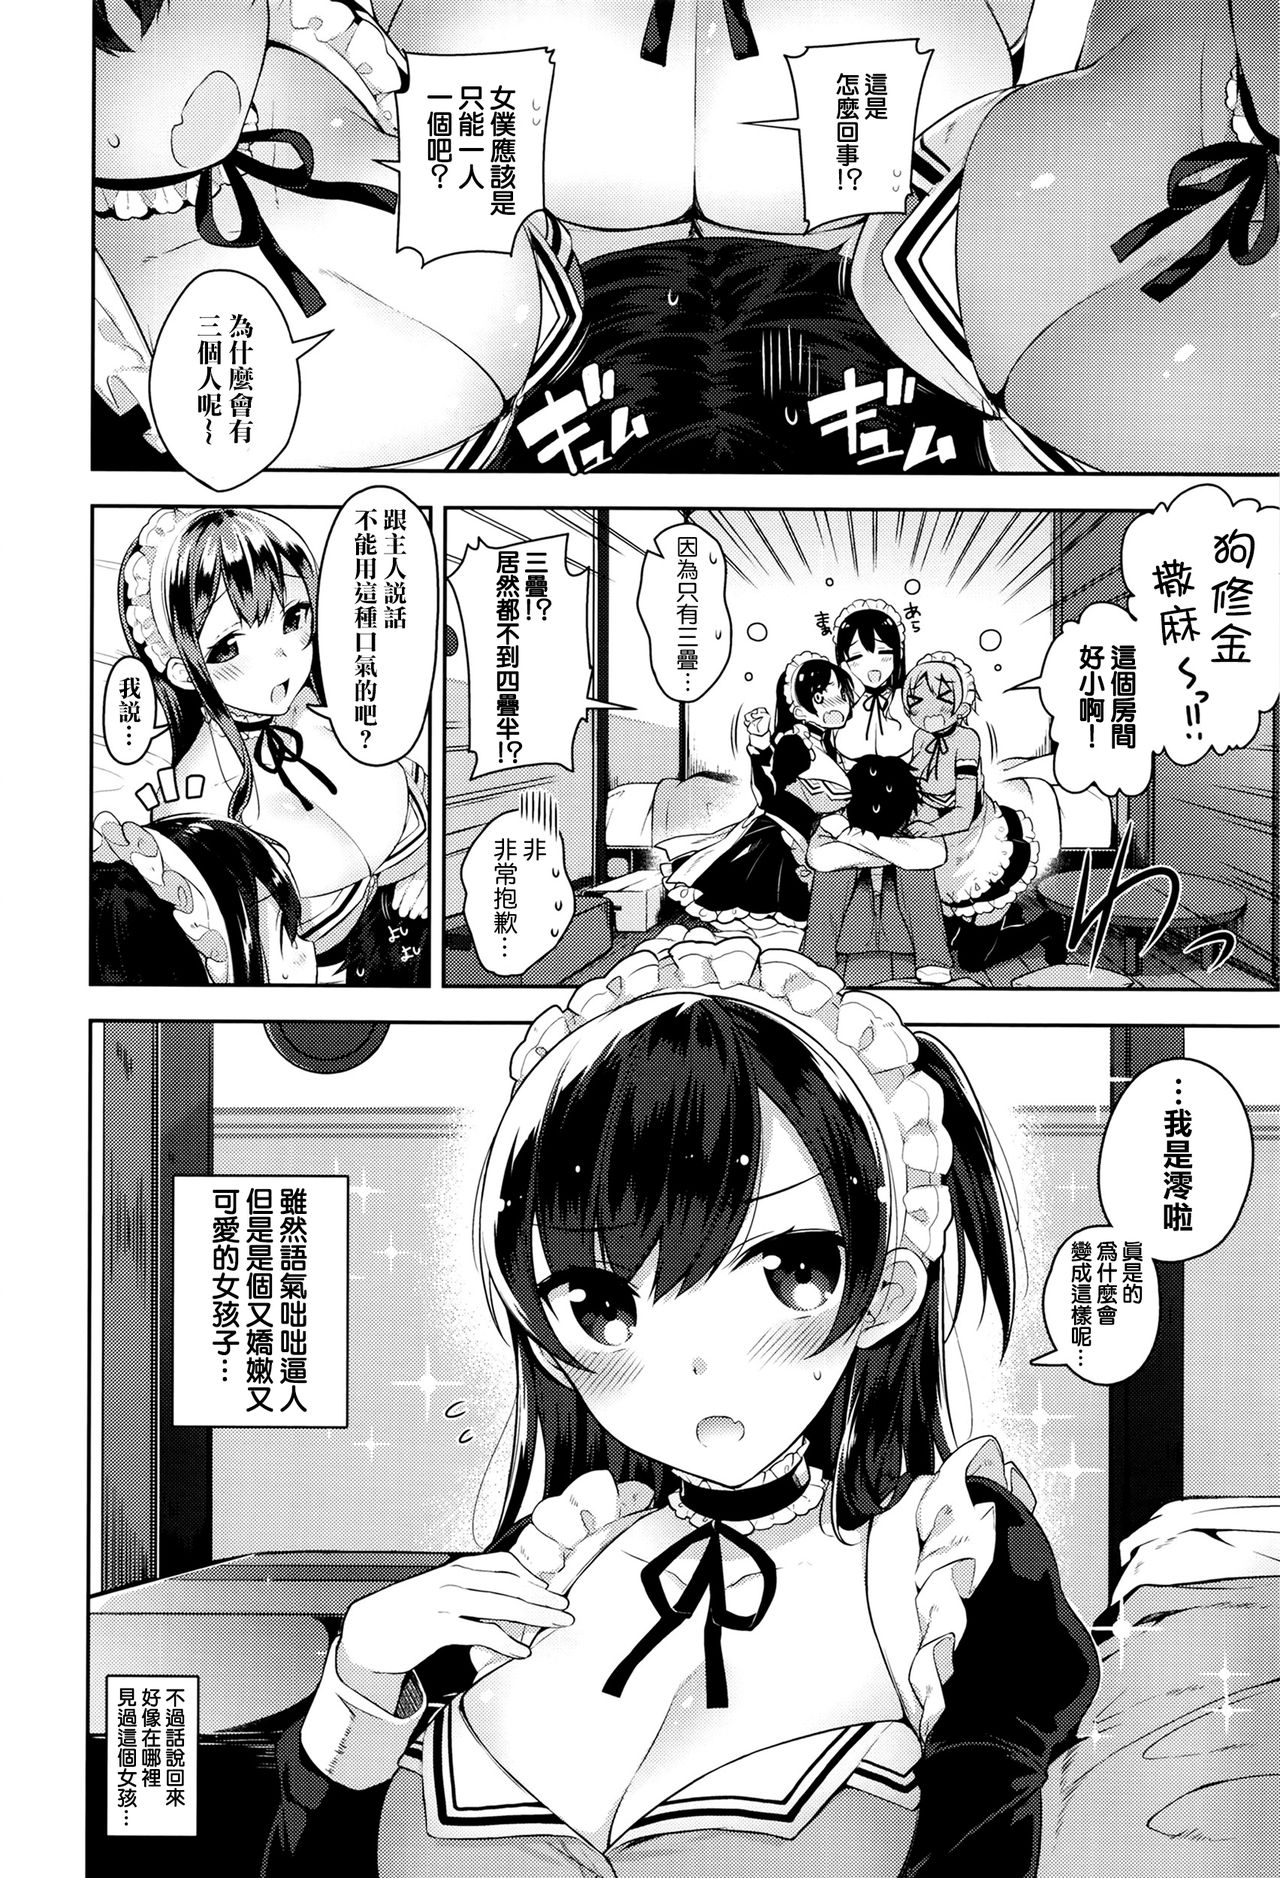 [Neet] Erie Dere - Please choose me, my master. (COMIC ExE 01) [Chinese] [无毒汉化组] [にぃと] エリエデレ (コミック エグゼ 01) [中文翻譯]